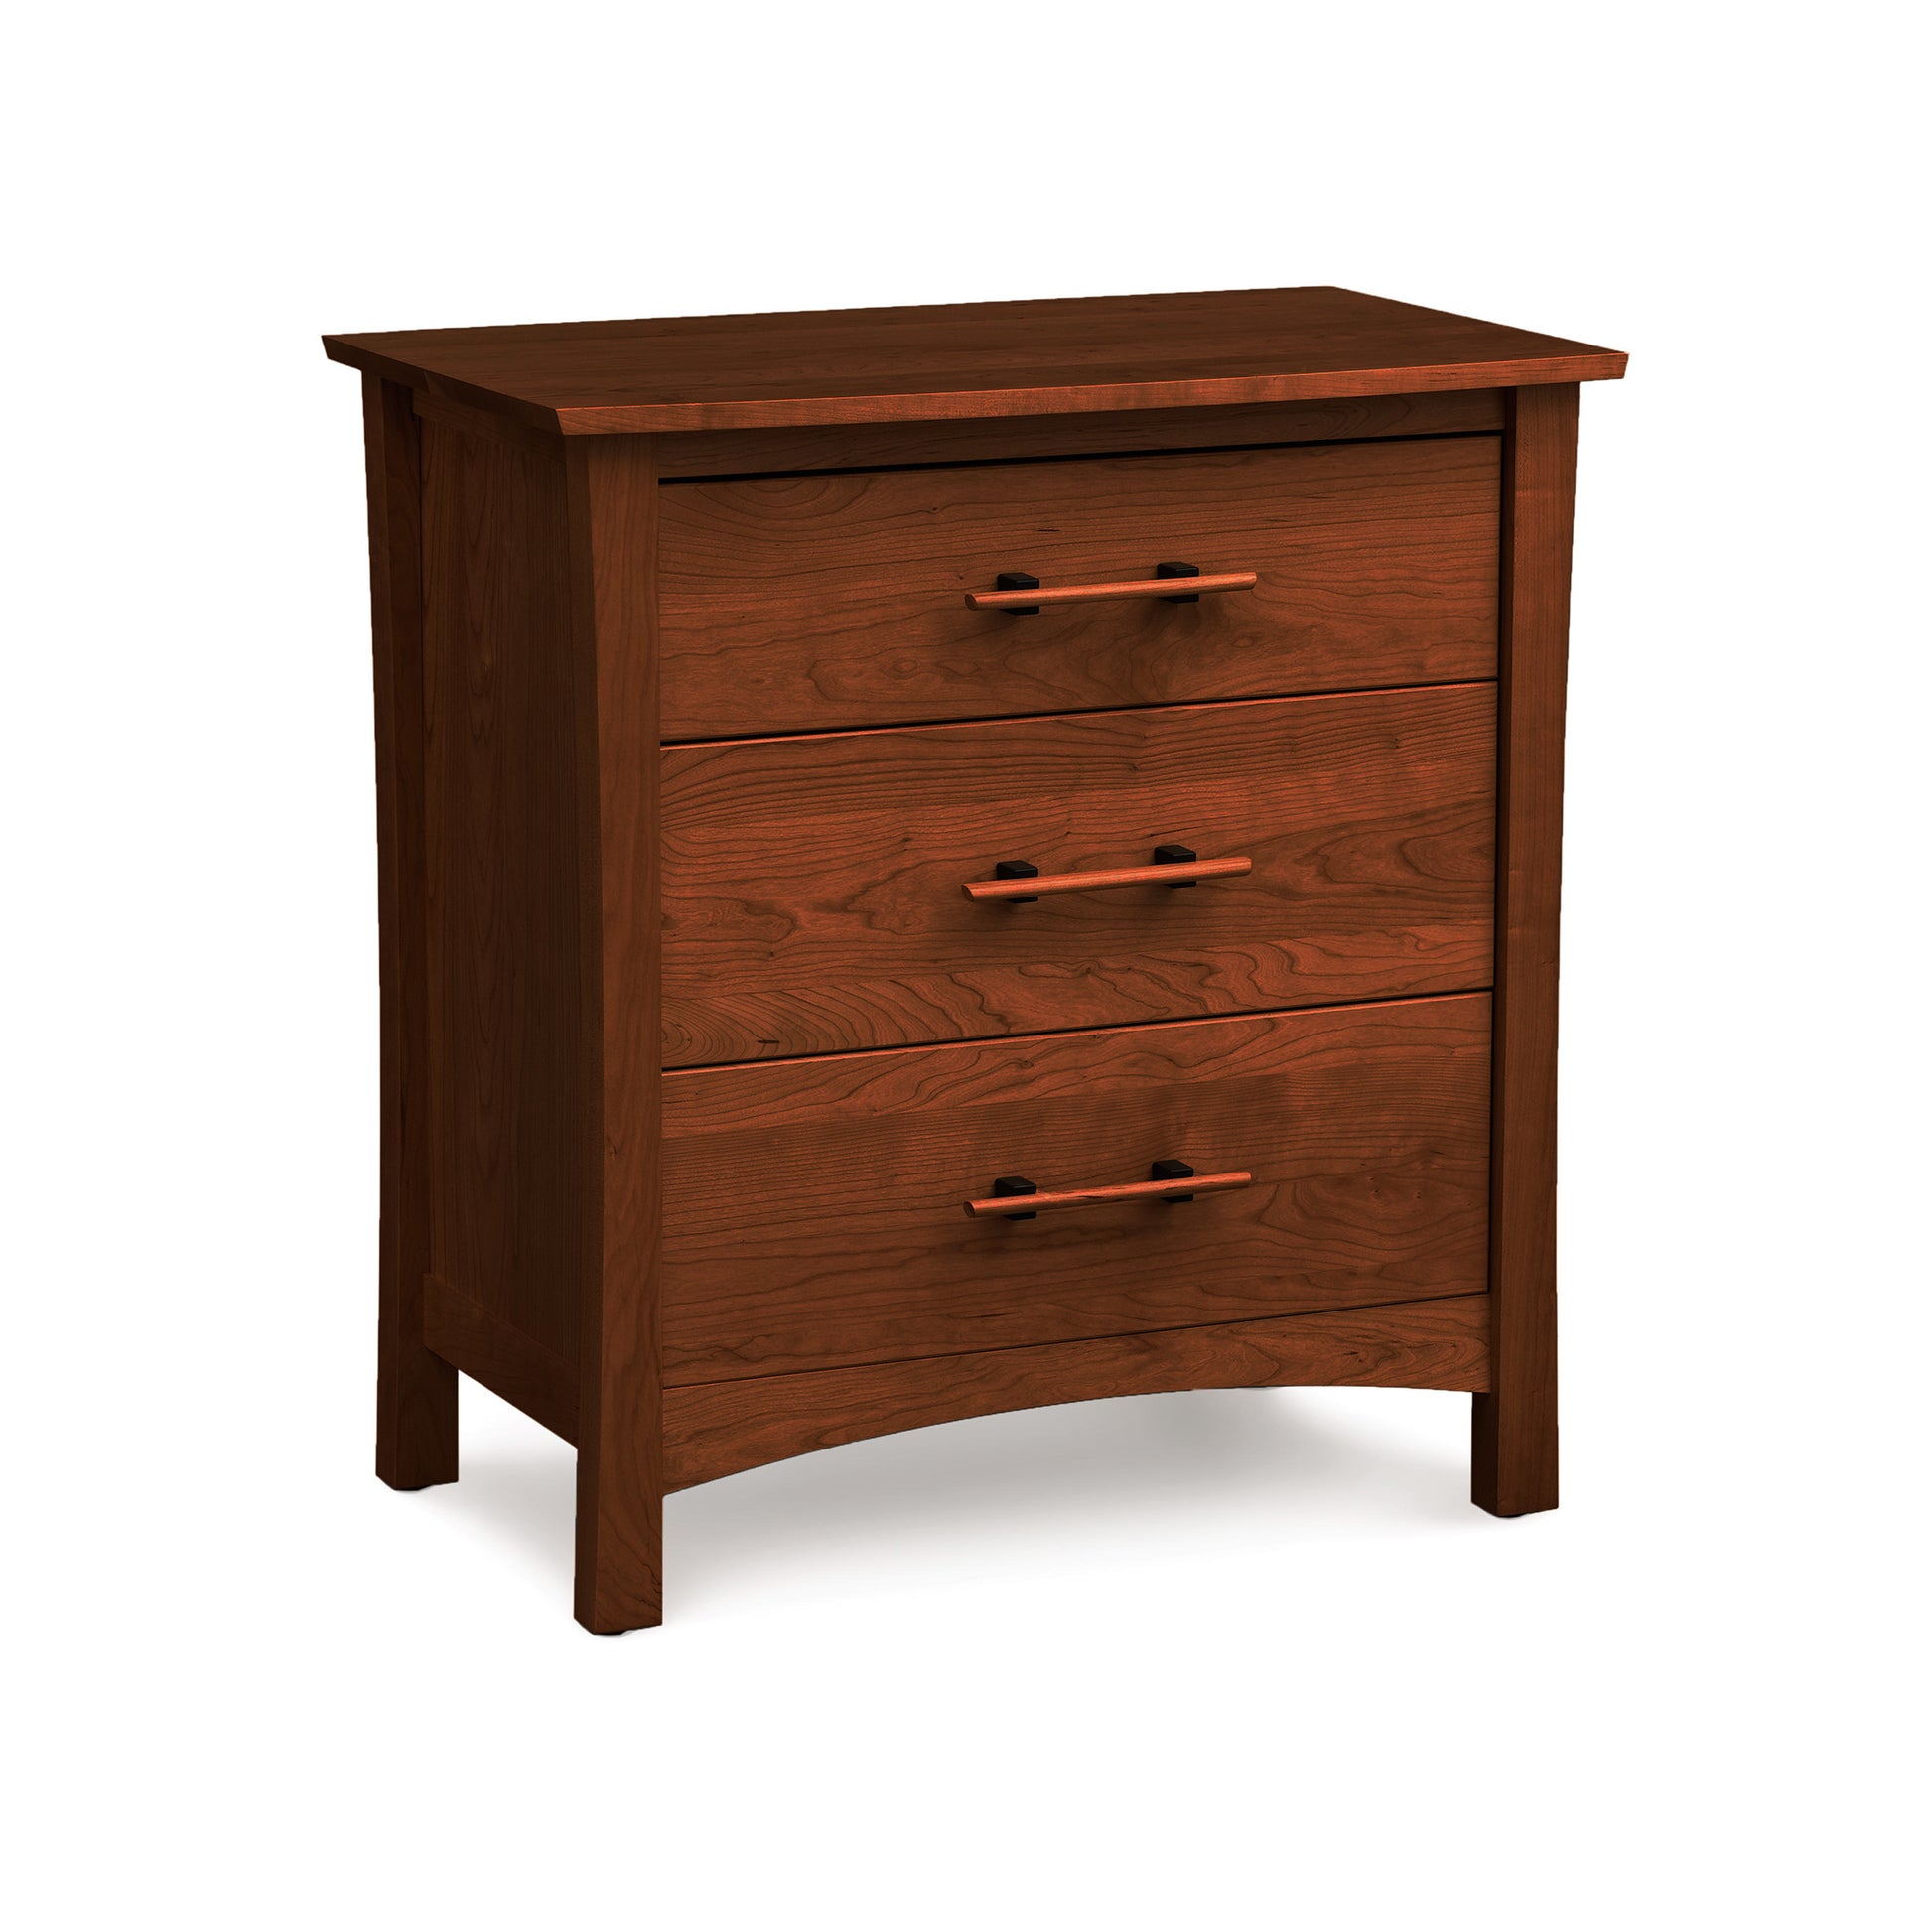 A luxurious Copeland Furniture Monterey 3-Drawer Chest made of cherry wood with three drawers, showcased on a white background.